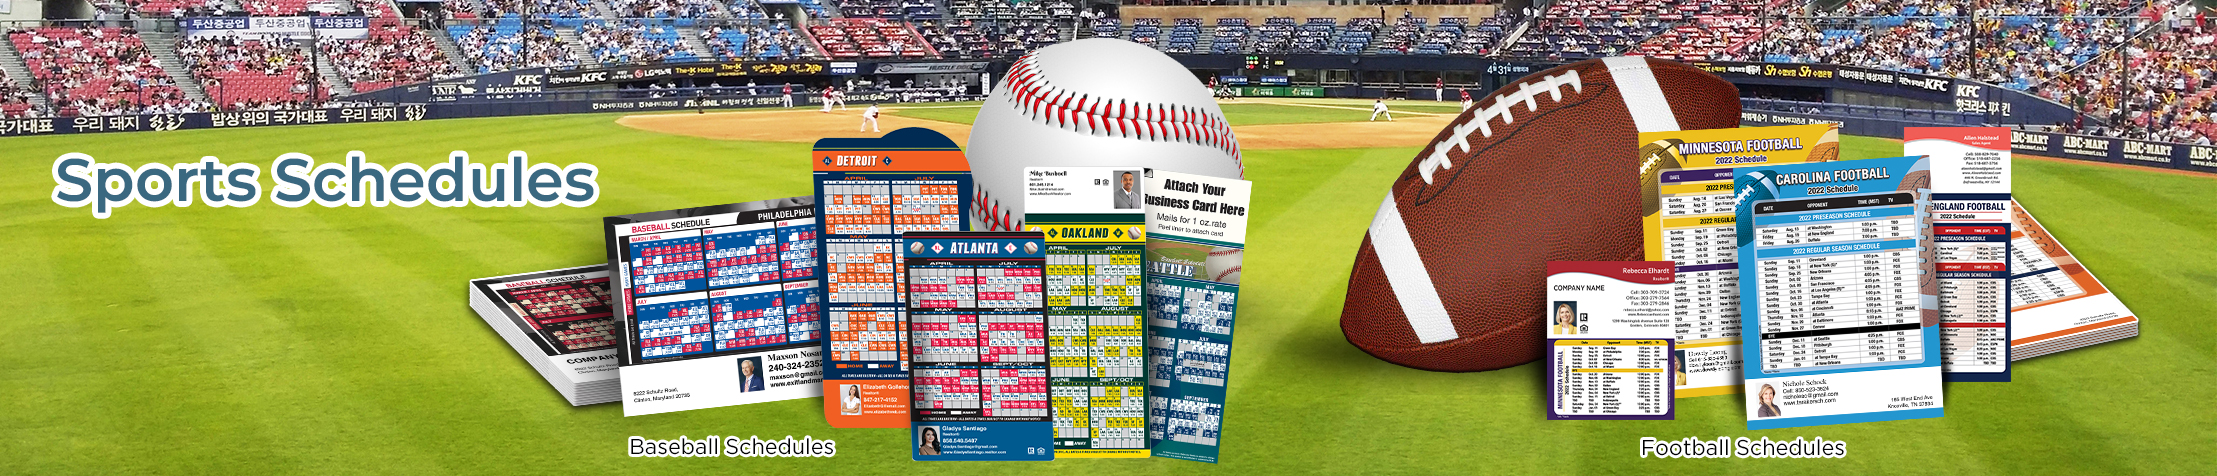 Coldwell Banker Real Estate Sports Schedules - Coldwell Banker custom sports schedule magnets | BestPrintBuy.com